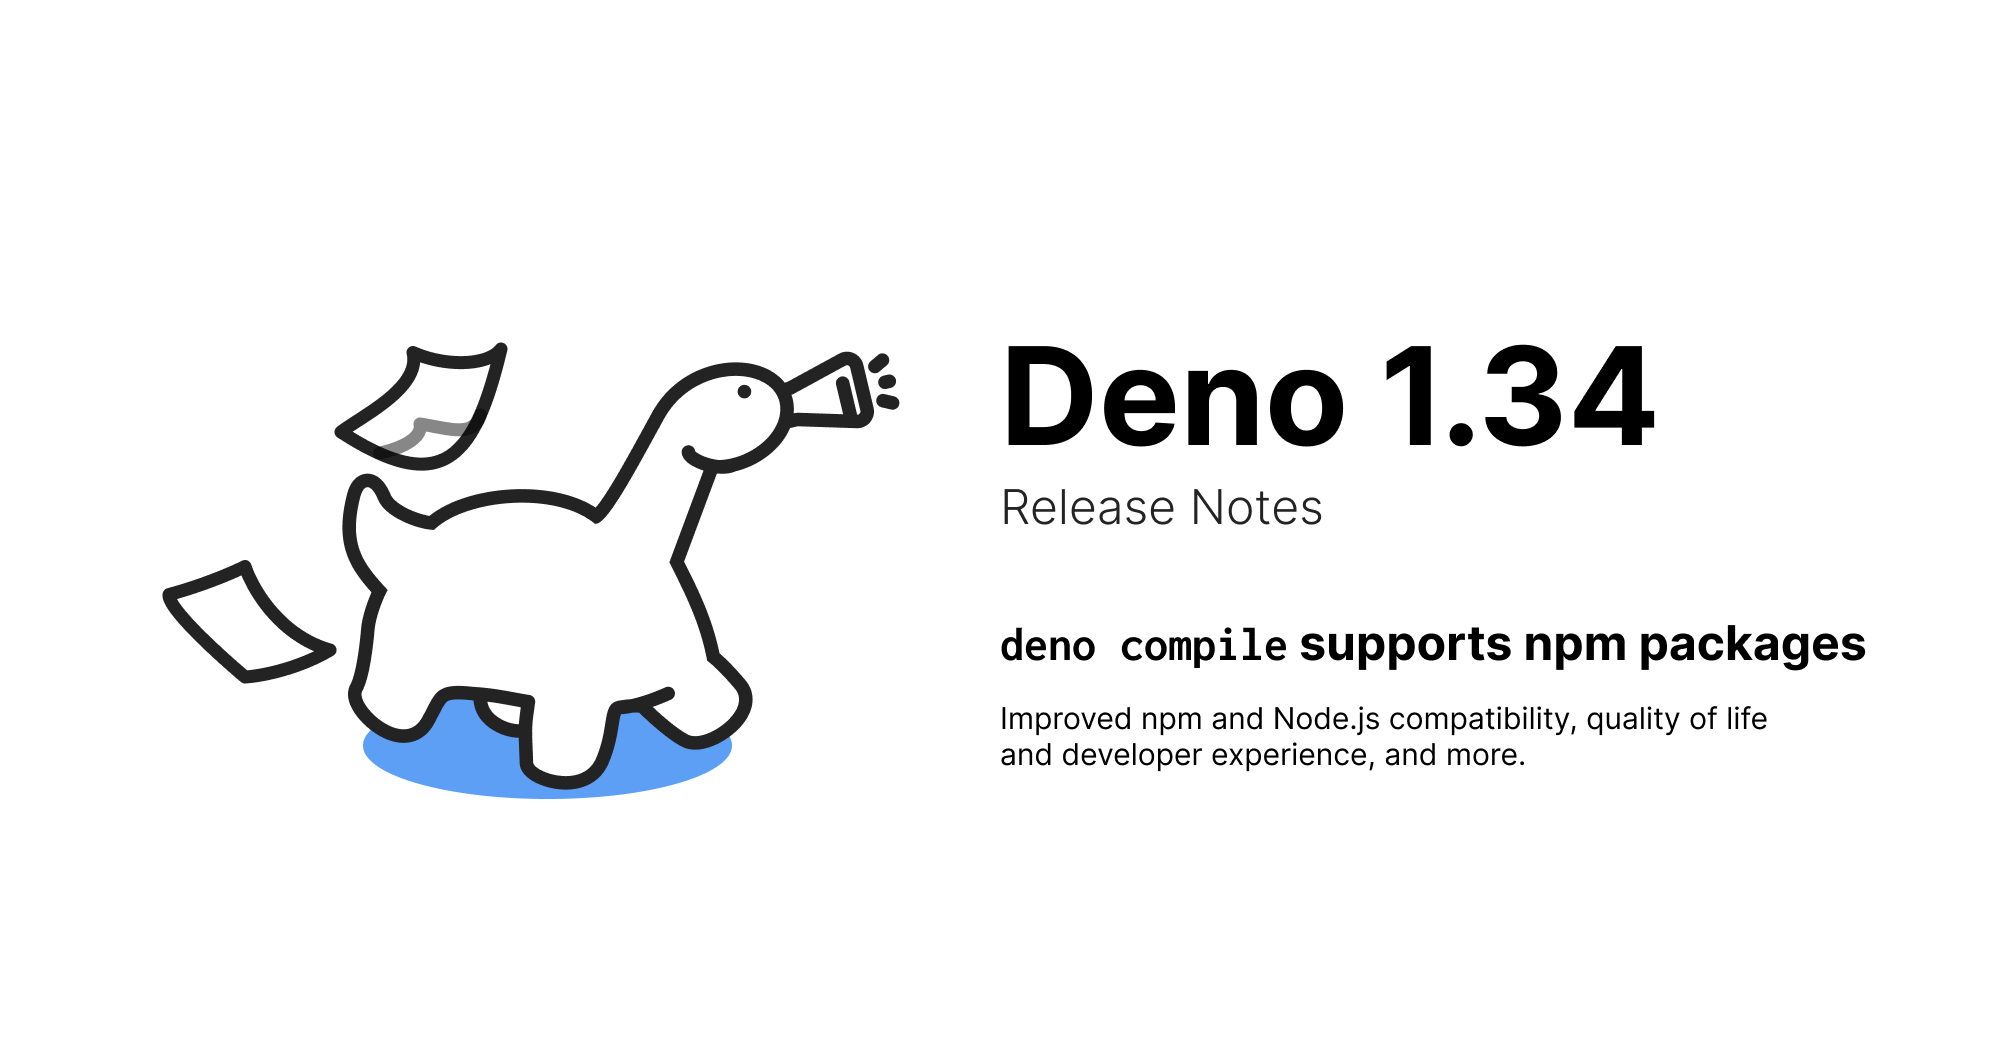 As we continue our development journey towards Deno 2, this minor release is primarily focused on boosting compatibility with npm and Node.js, enhanci